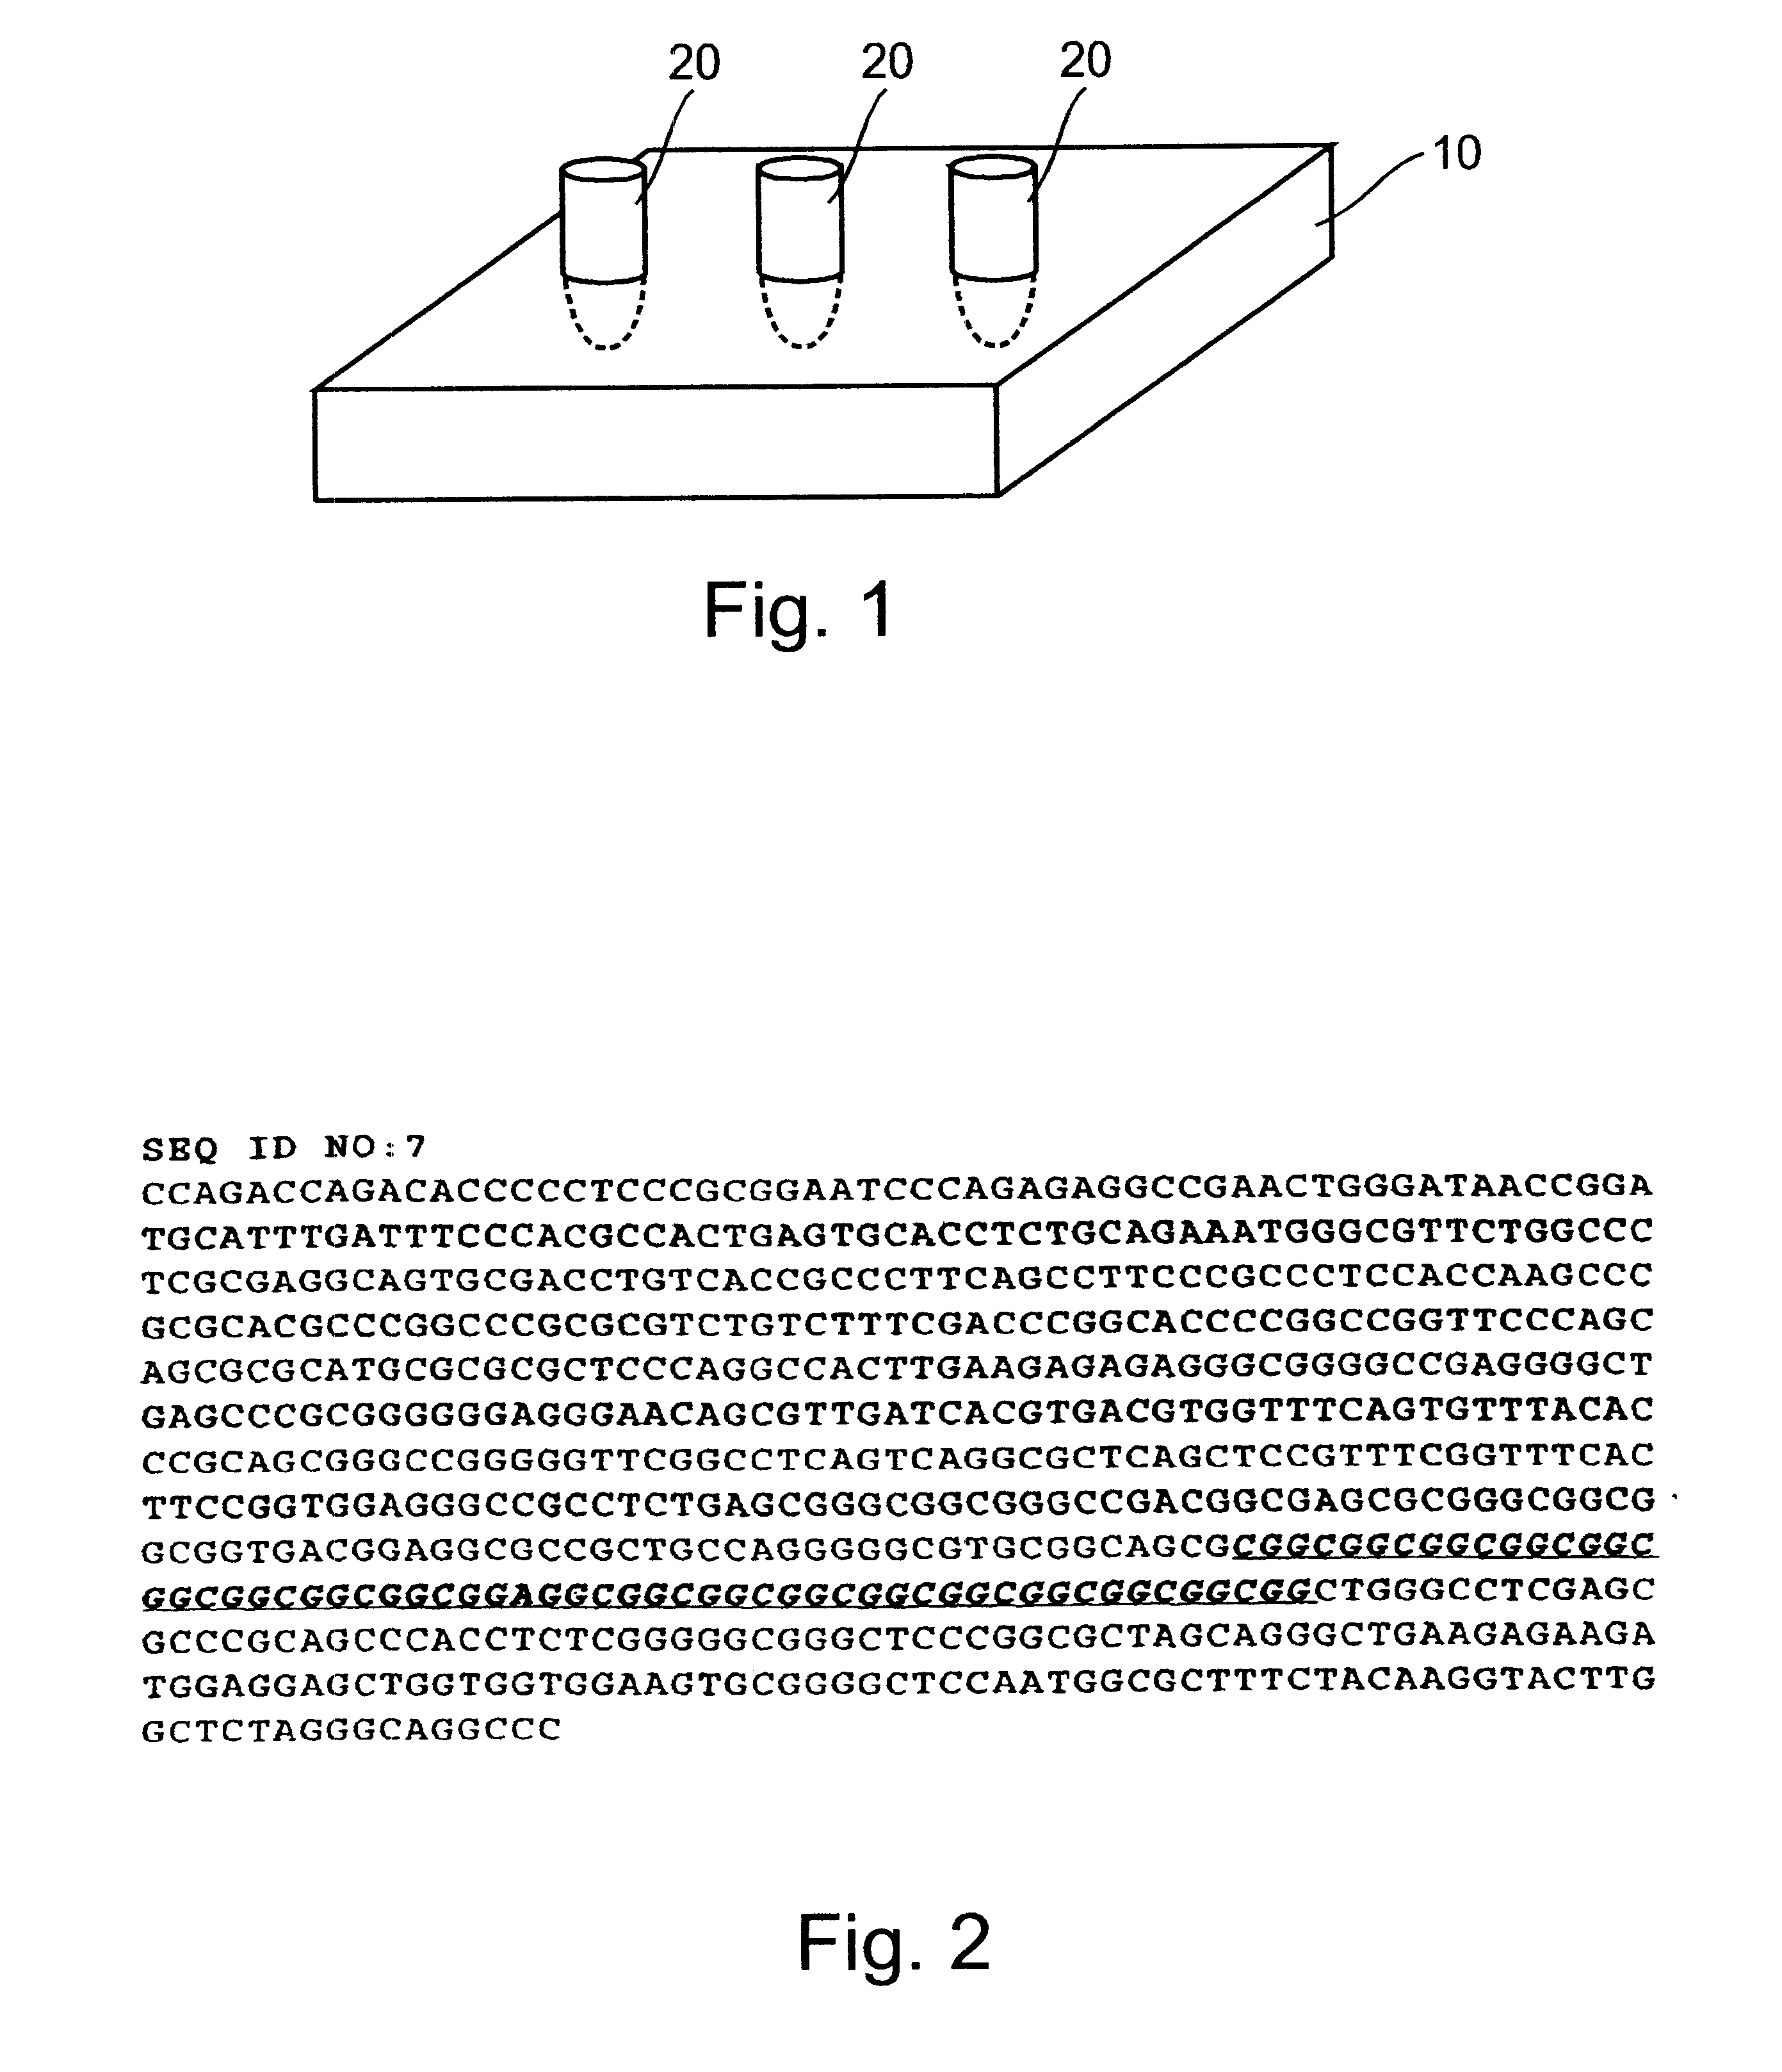 Methods and kits for characterizing GC-rich nucleic acid sequences